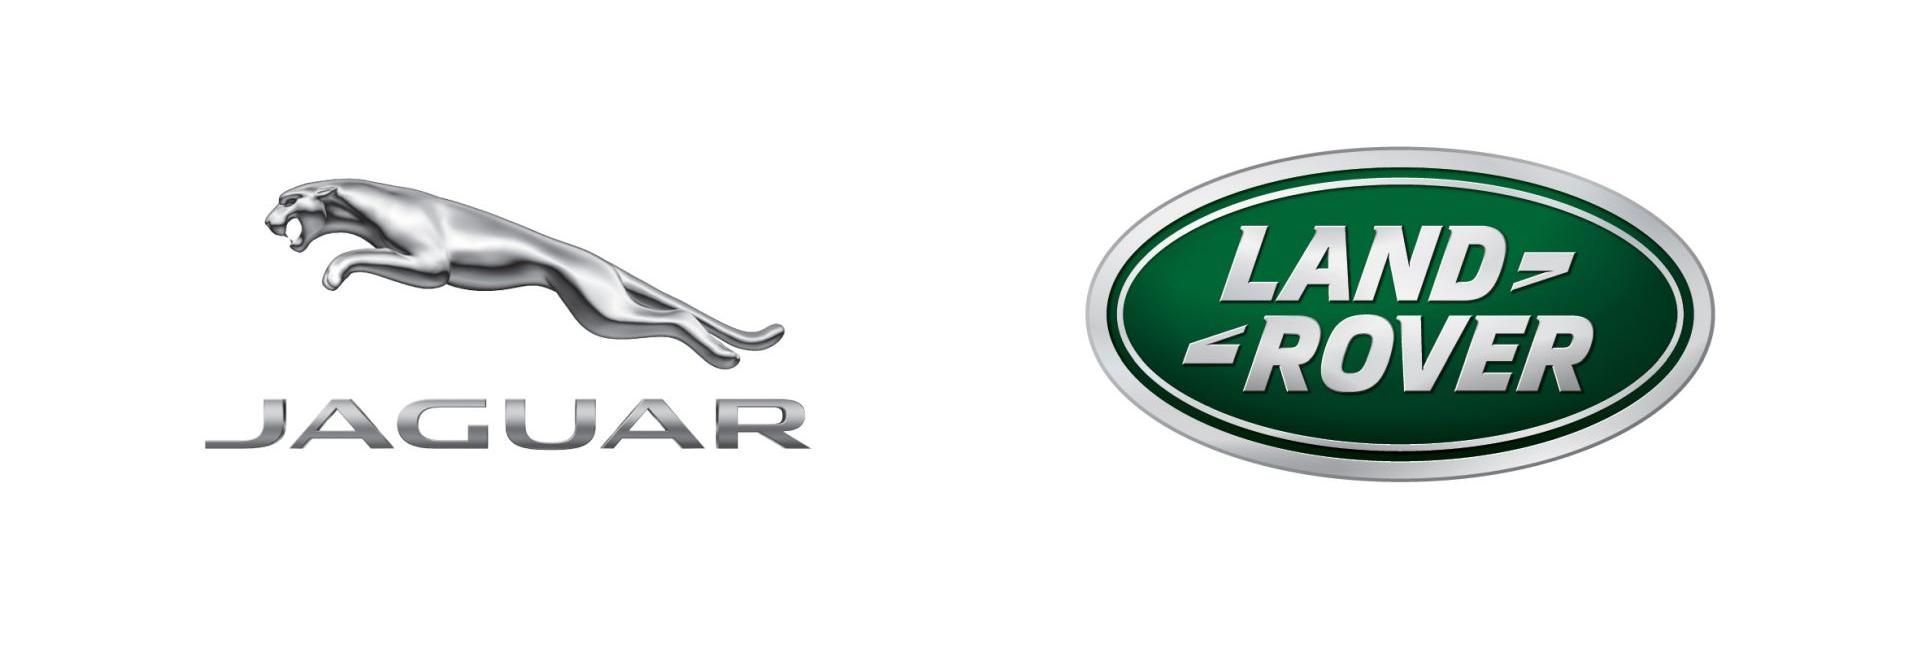 Jaguar Land Rover announces Technical Engineering Office in Hungary